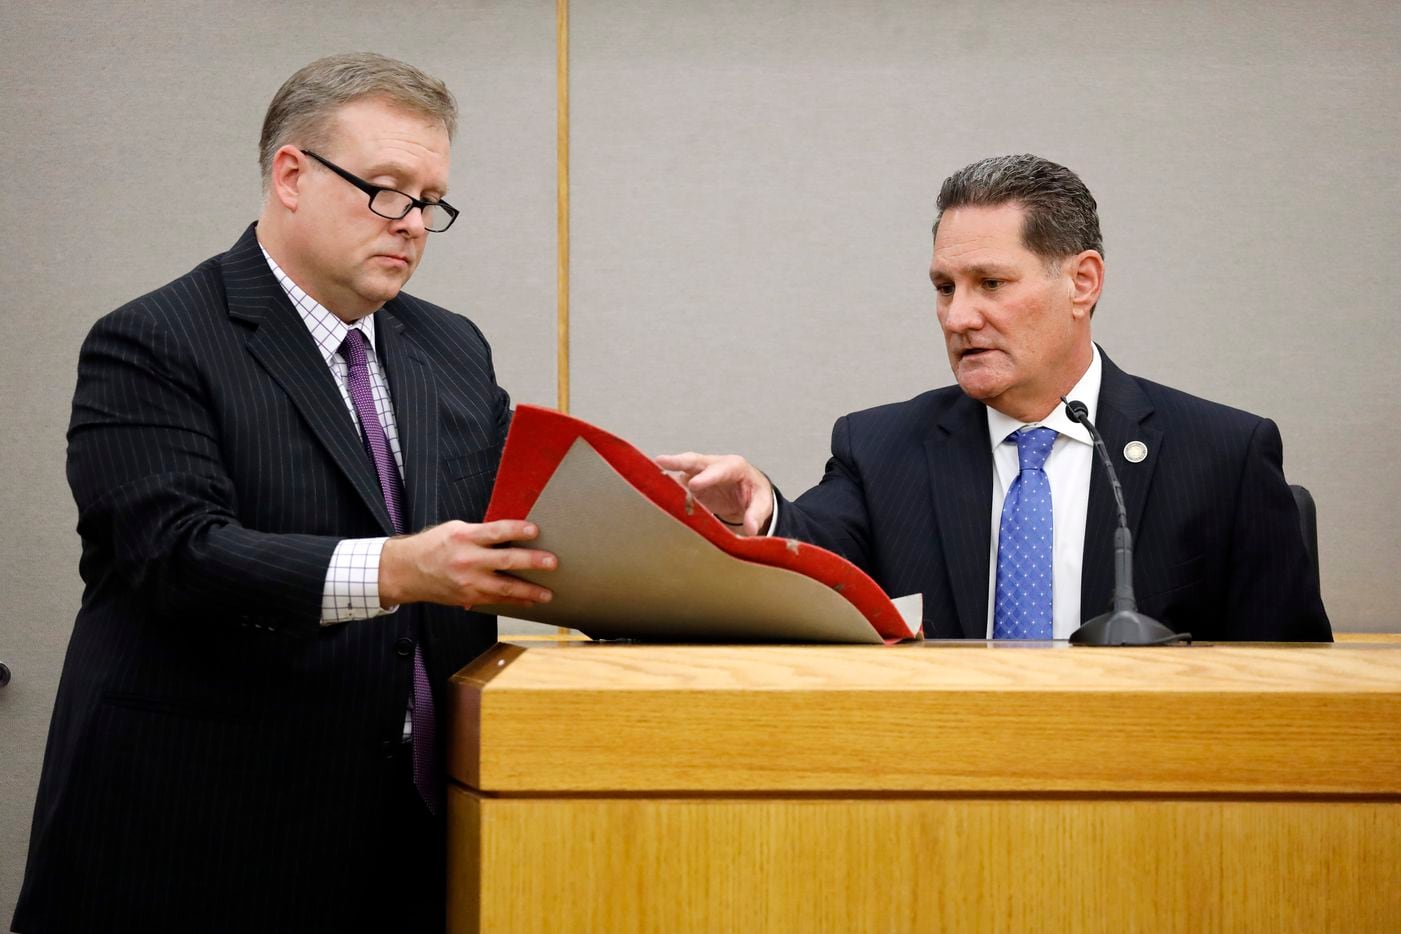 Dallas County District Attorney criminal investigator Michael Grice (right) shows Assistant District Attorney Jason Hermus (left) Botham Jean's front door mat he acquired through a court order. 